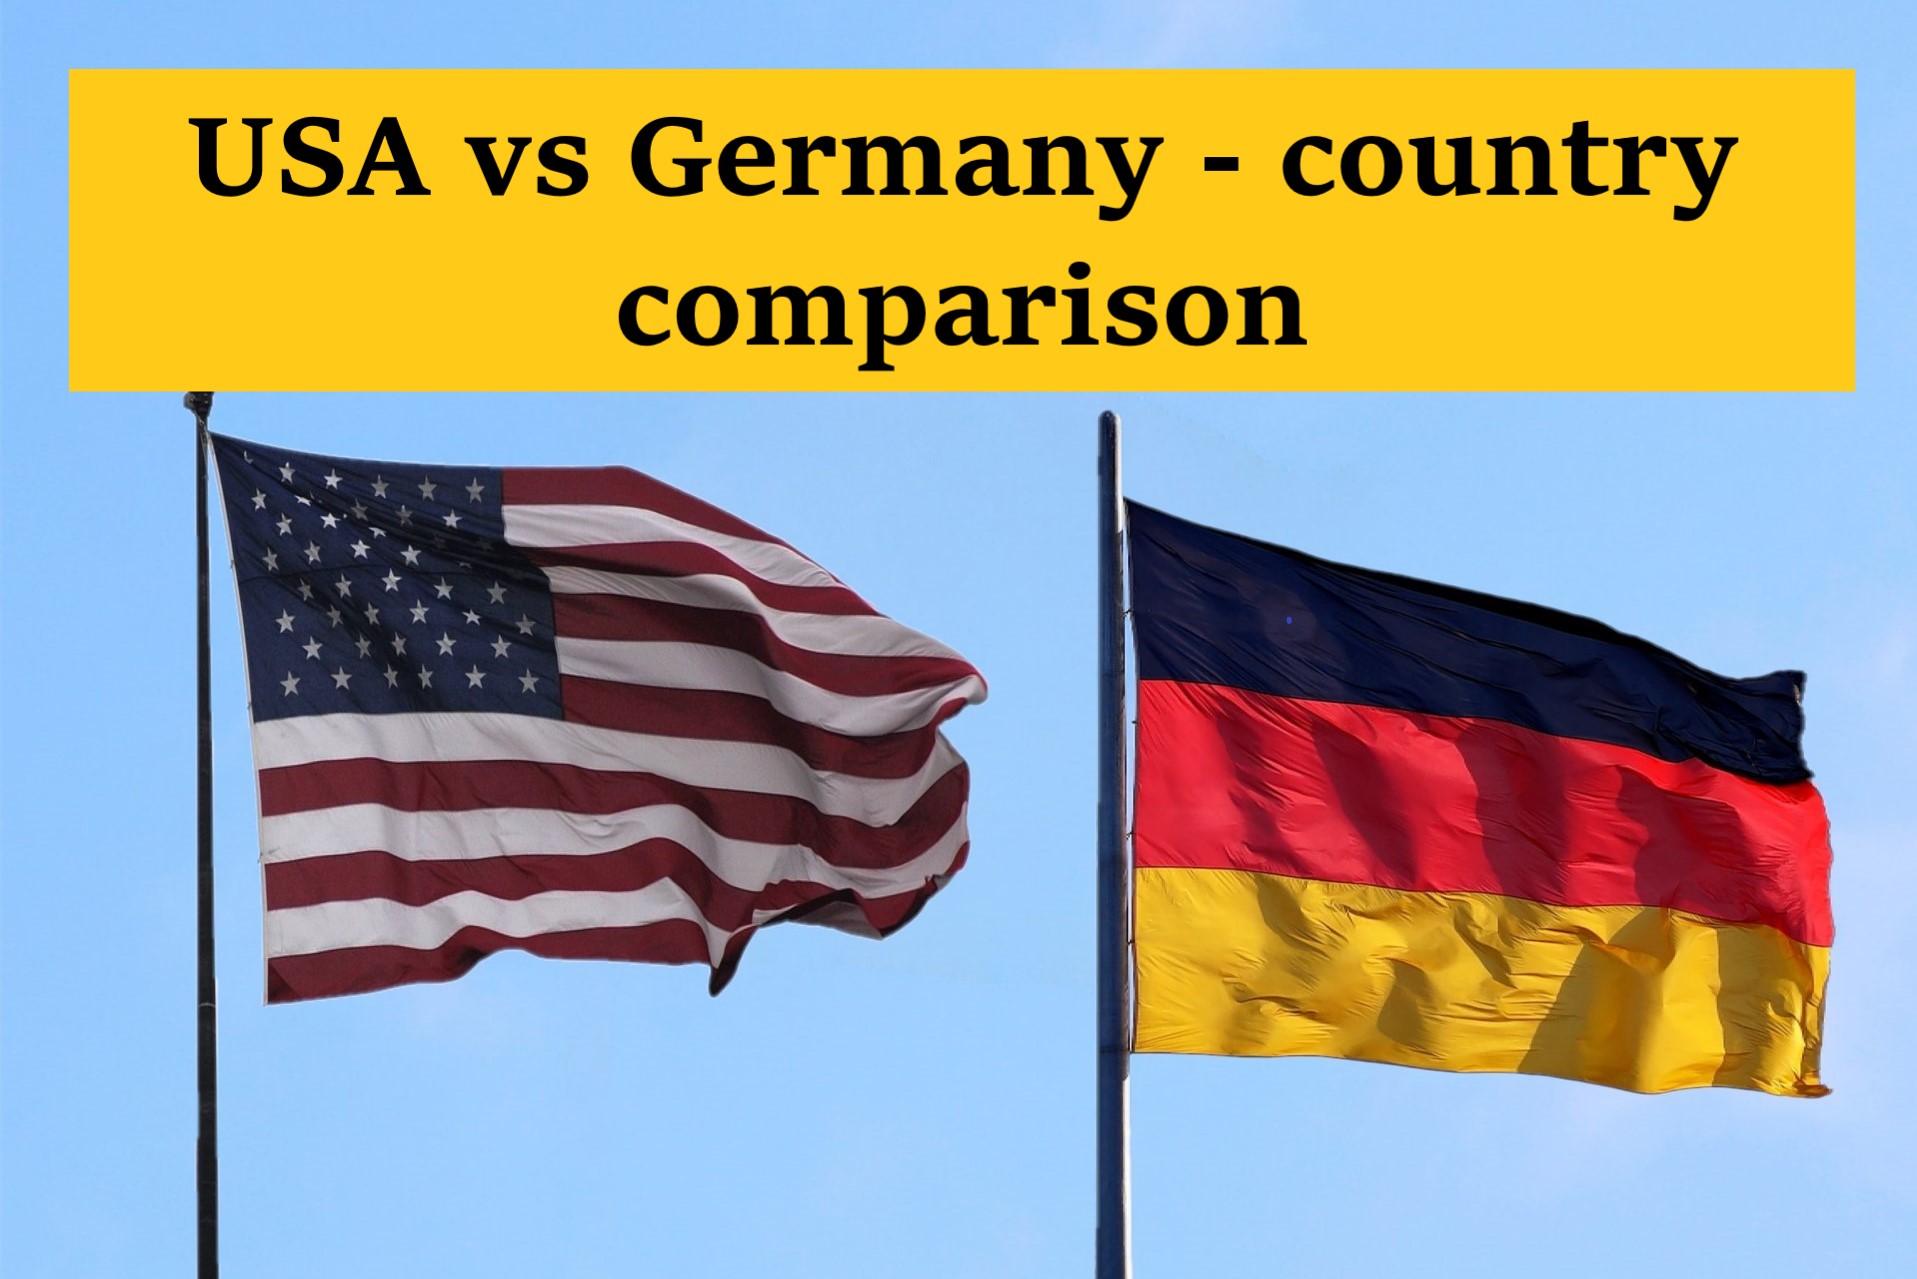 USA and Germany country comparison USA vs Germany